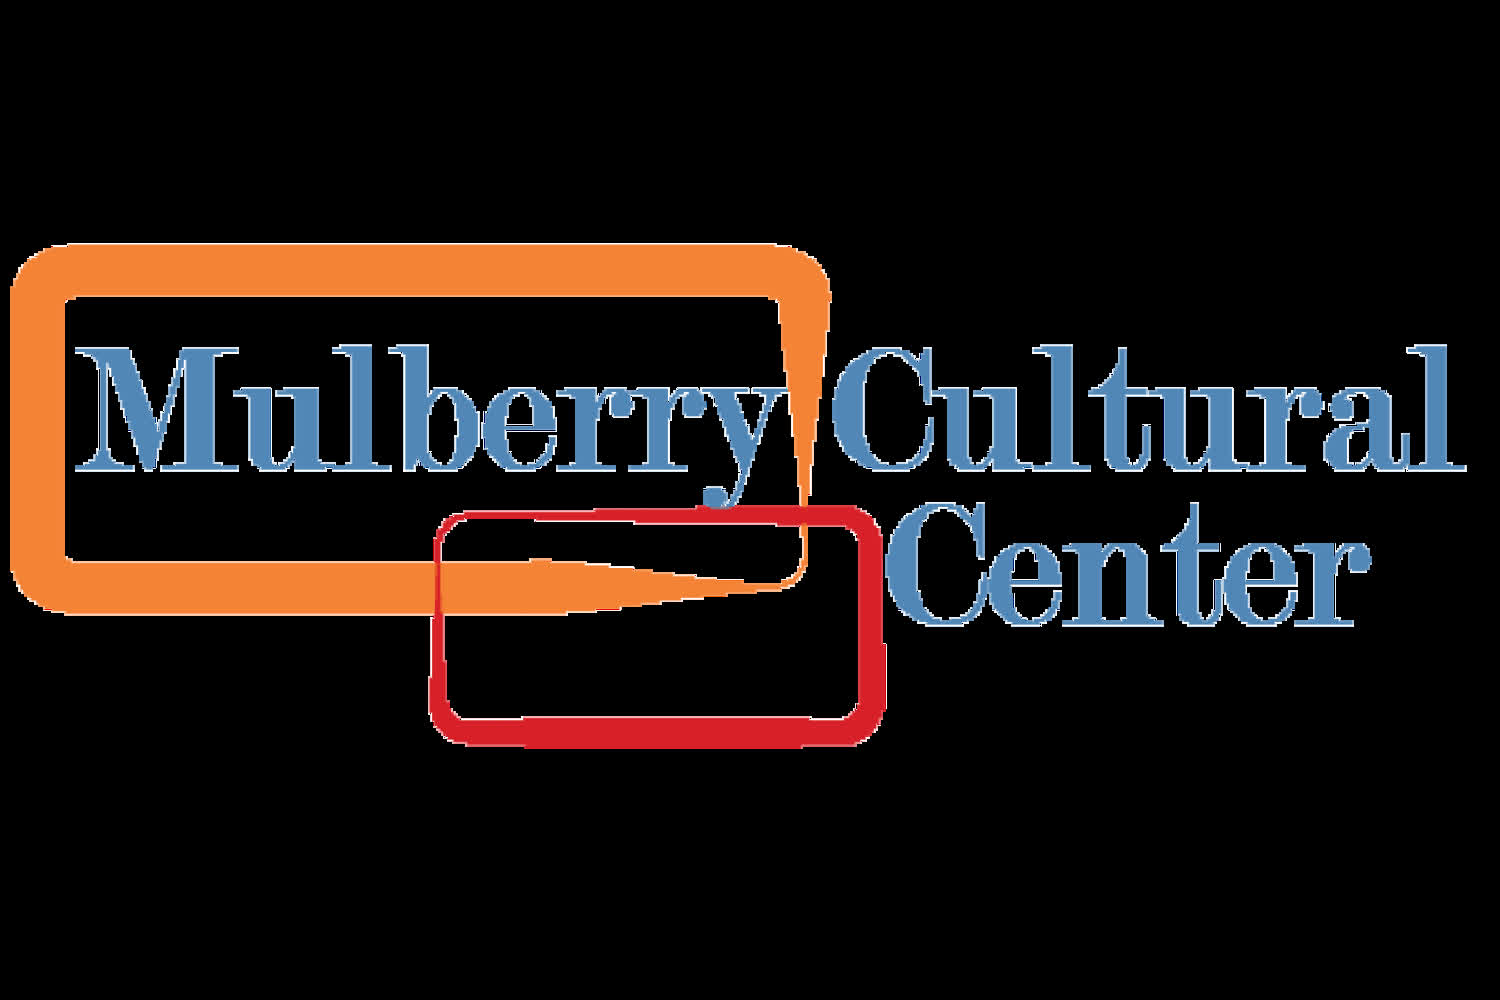 About the Mulberry Cultural Center